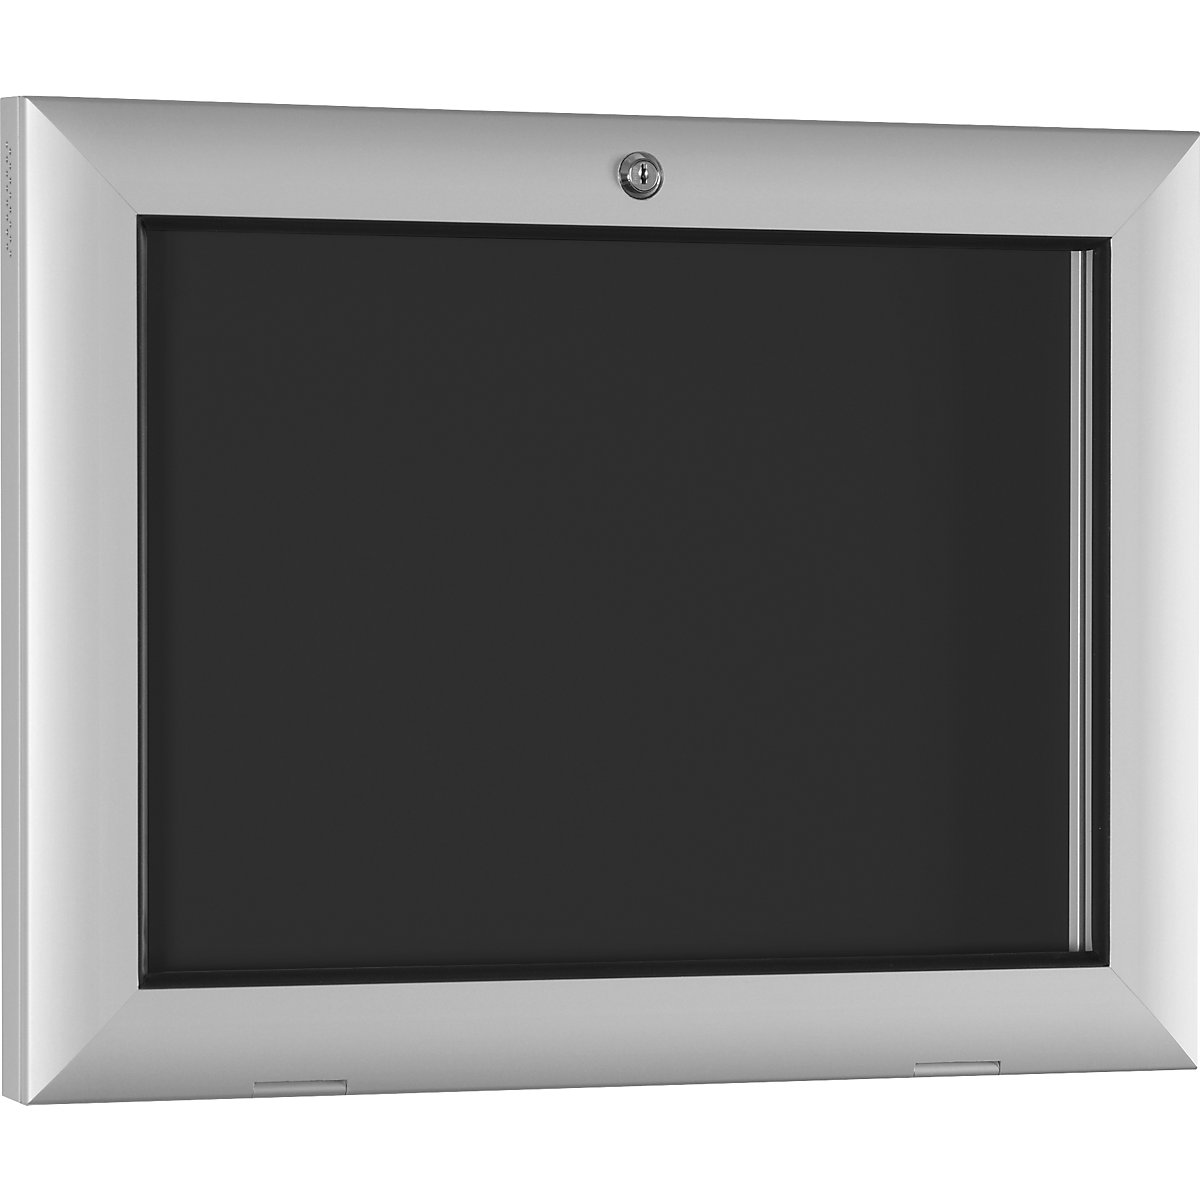 Display case for indoor and outdoor use